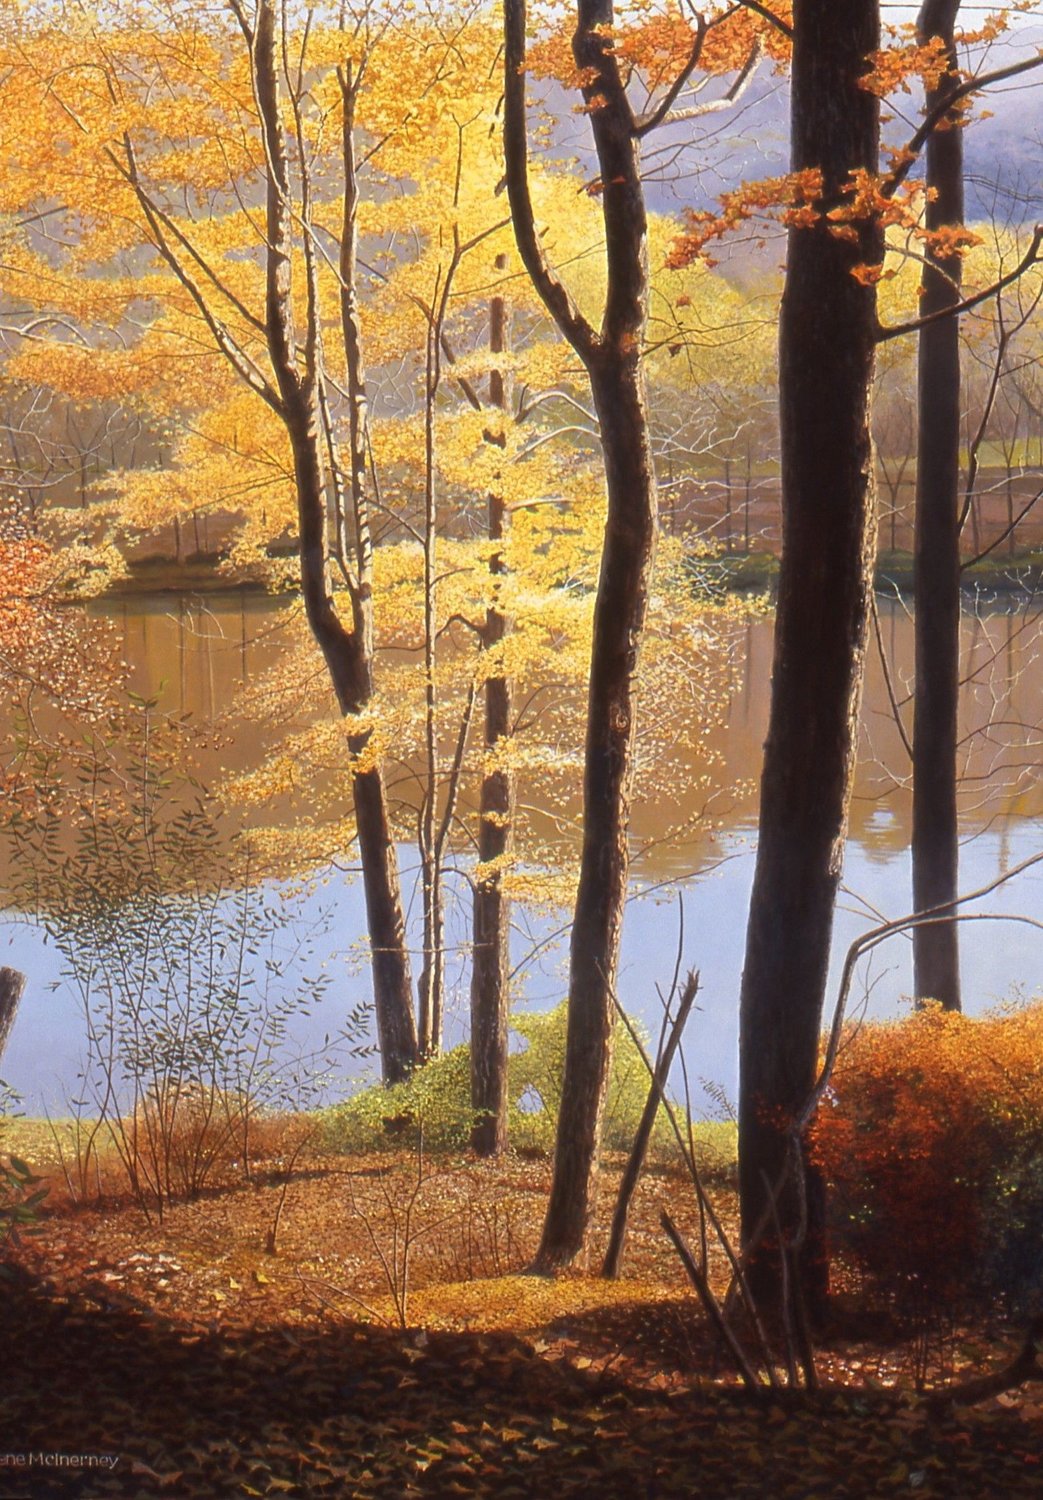 "Upper Reaches" is an oil painting by Gene McInerney.